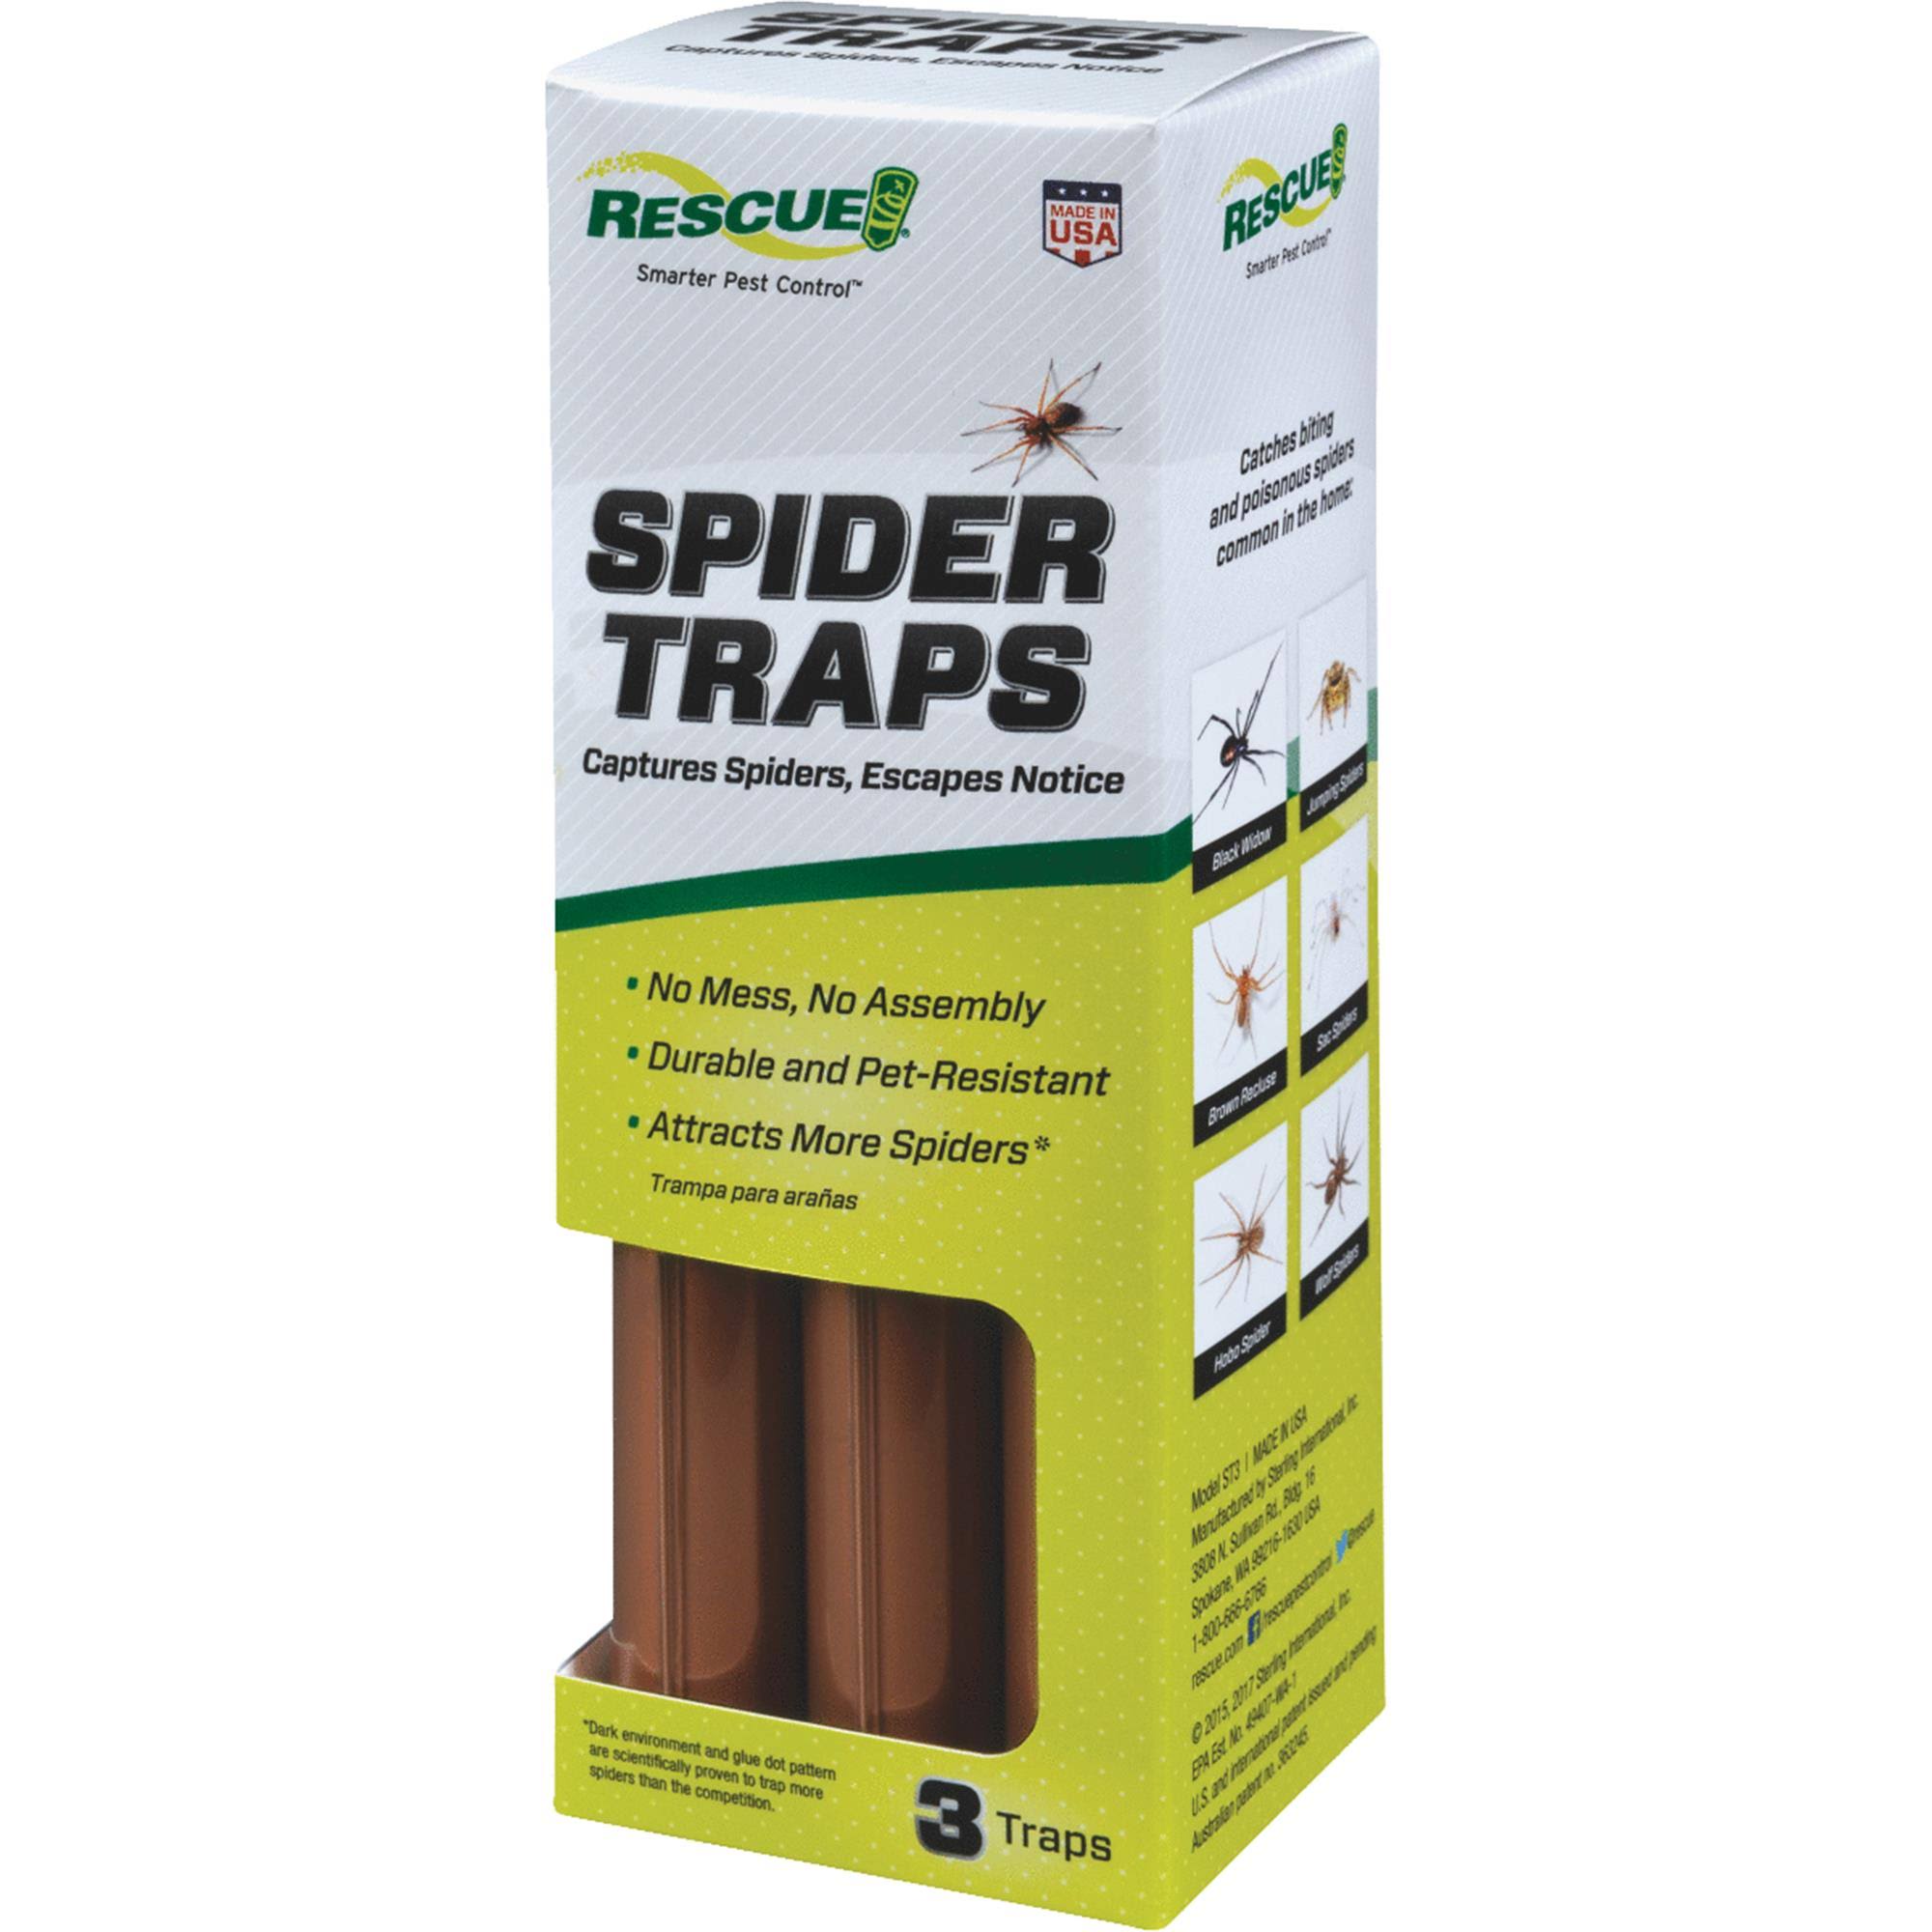 Rescue Spider Trap - 3 Pack